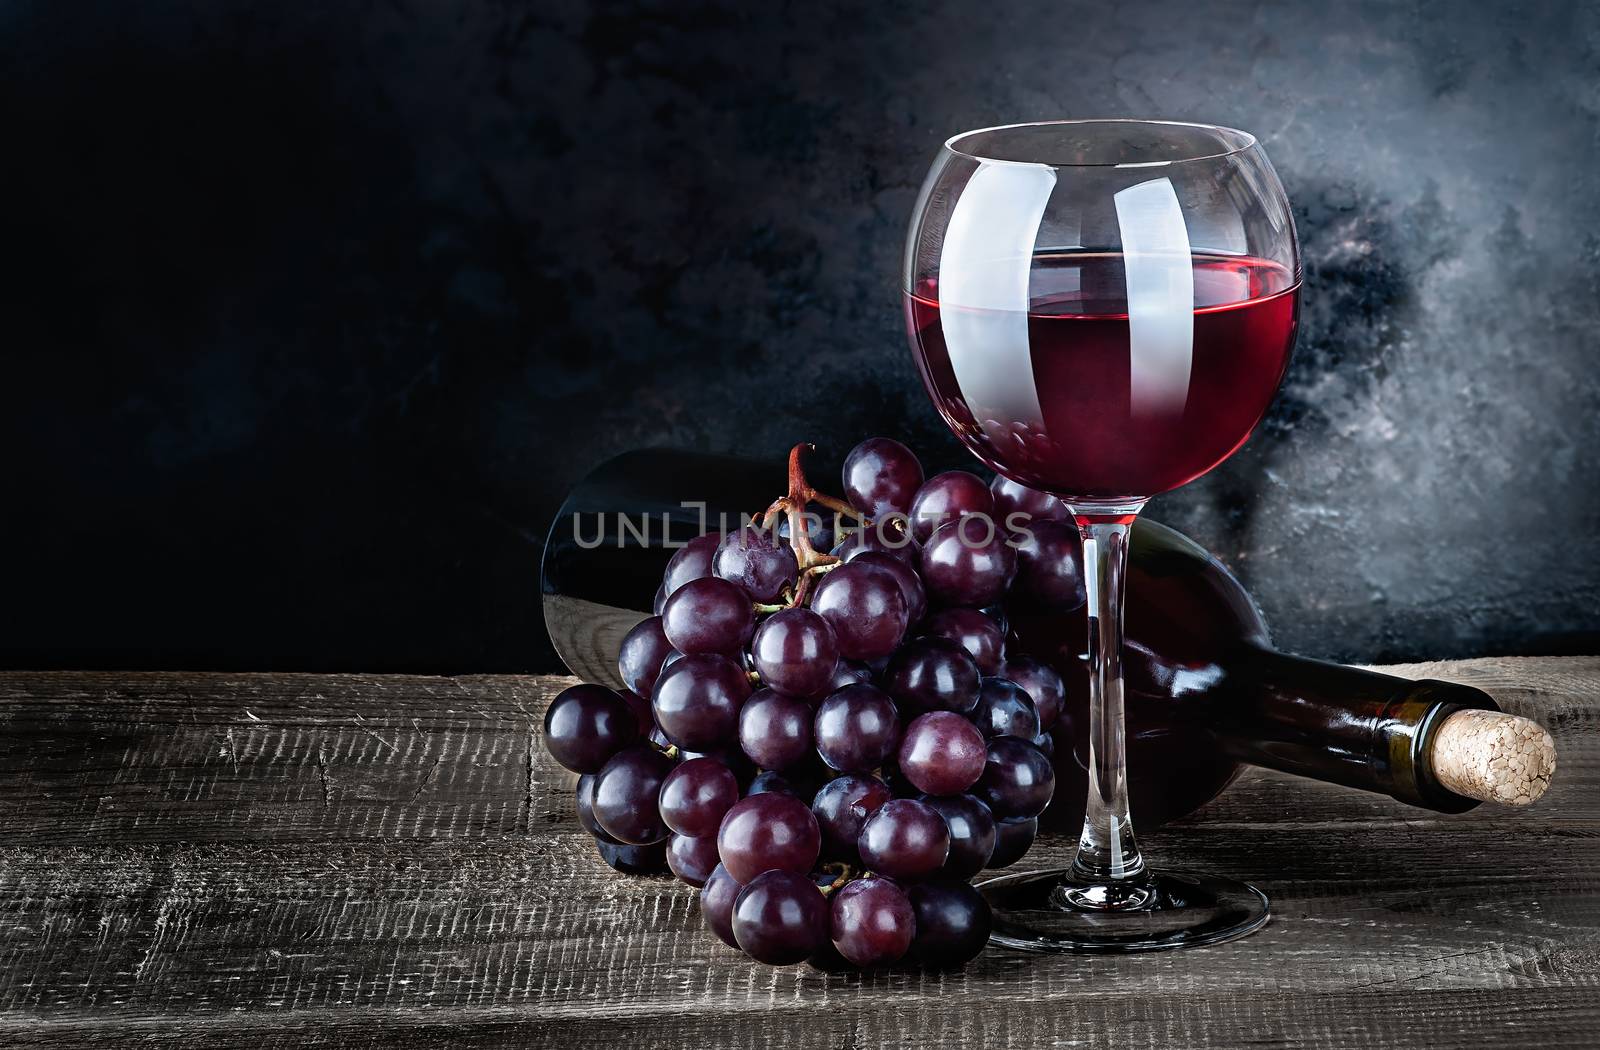 Red wine with grapes and bottle on a wooden table. The bottle lies. Dark background.